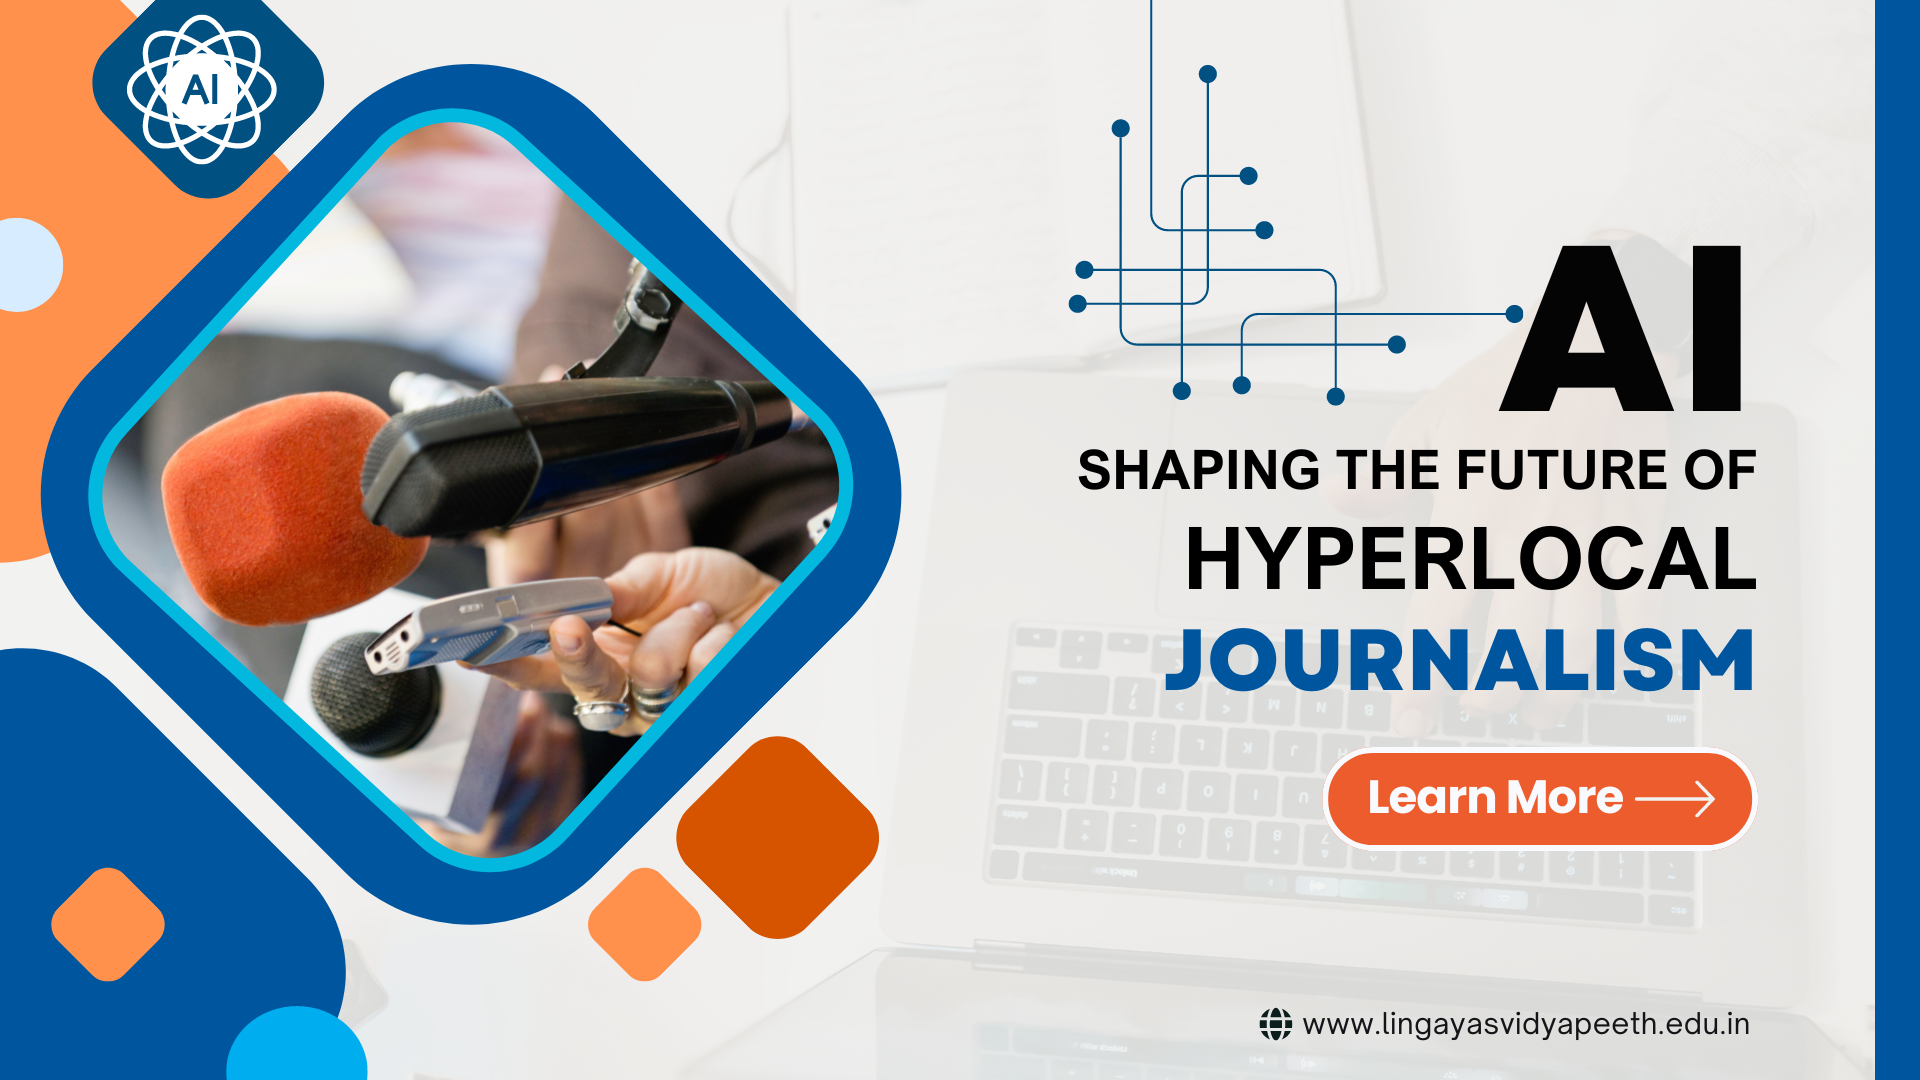 How Are AI Technologies Shaping the Future of Hyperlocal Journalism?